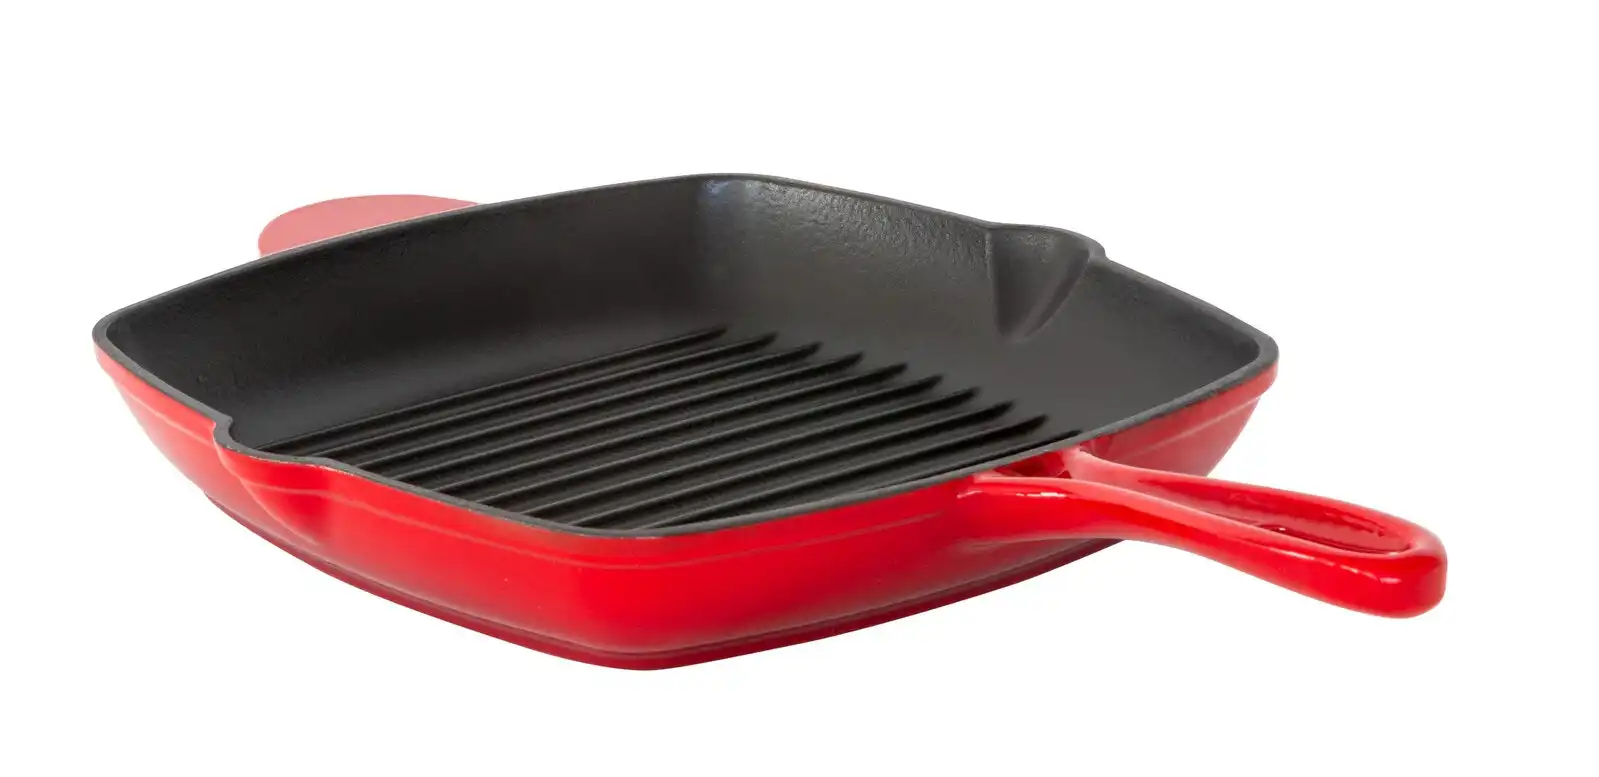 Enamelled Cast Iron Square Grill Pan (44 x 30 x 4.7 cm) - Red